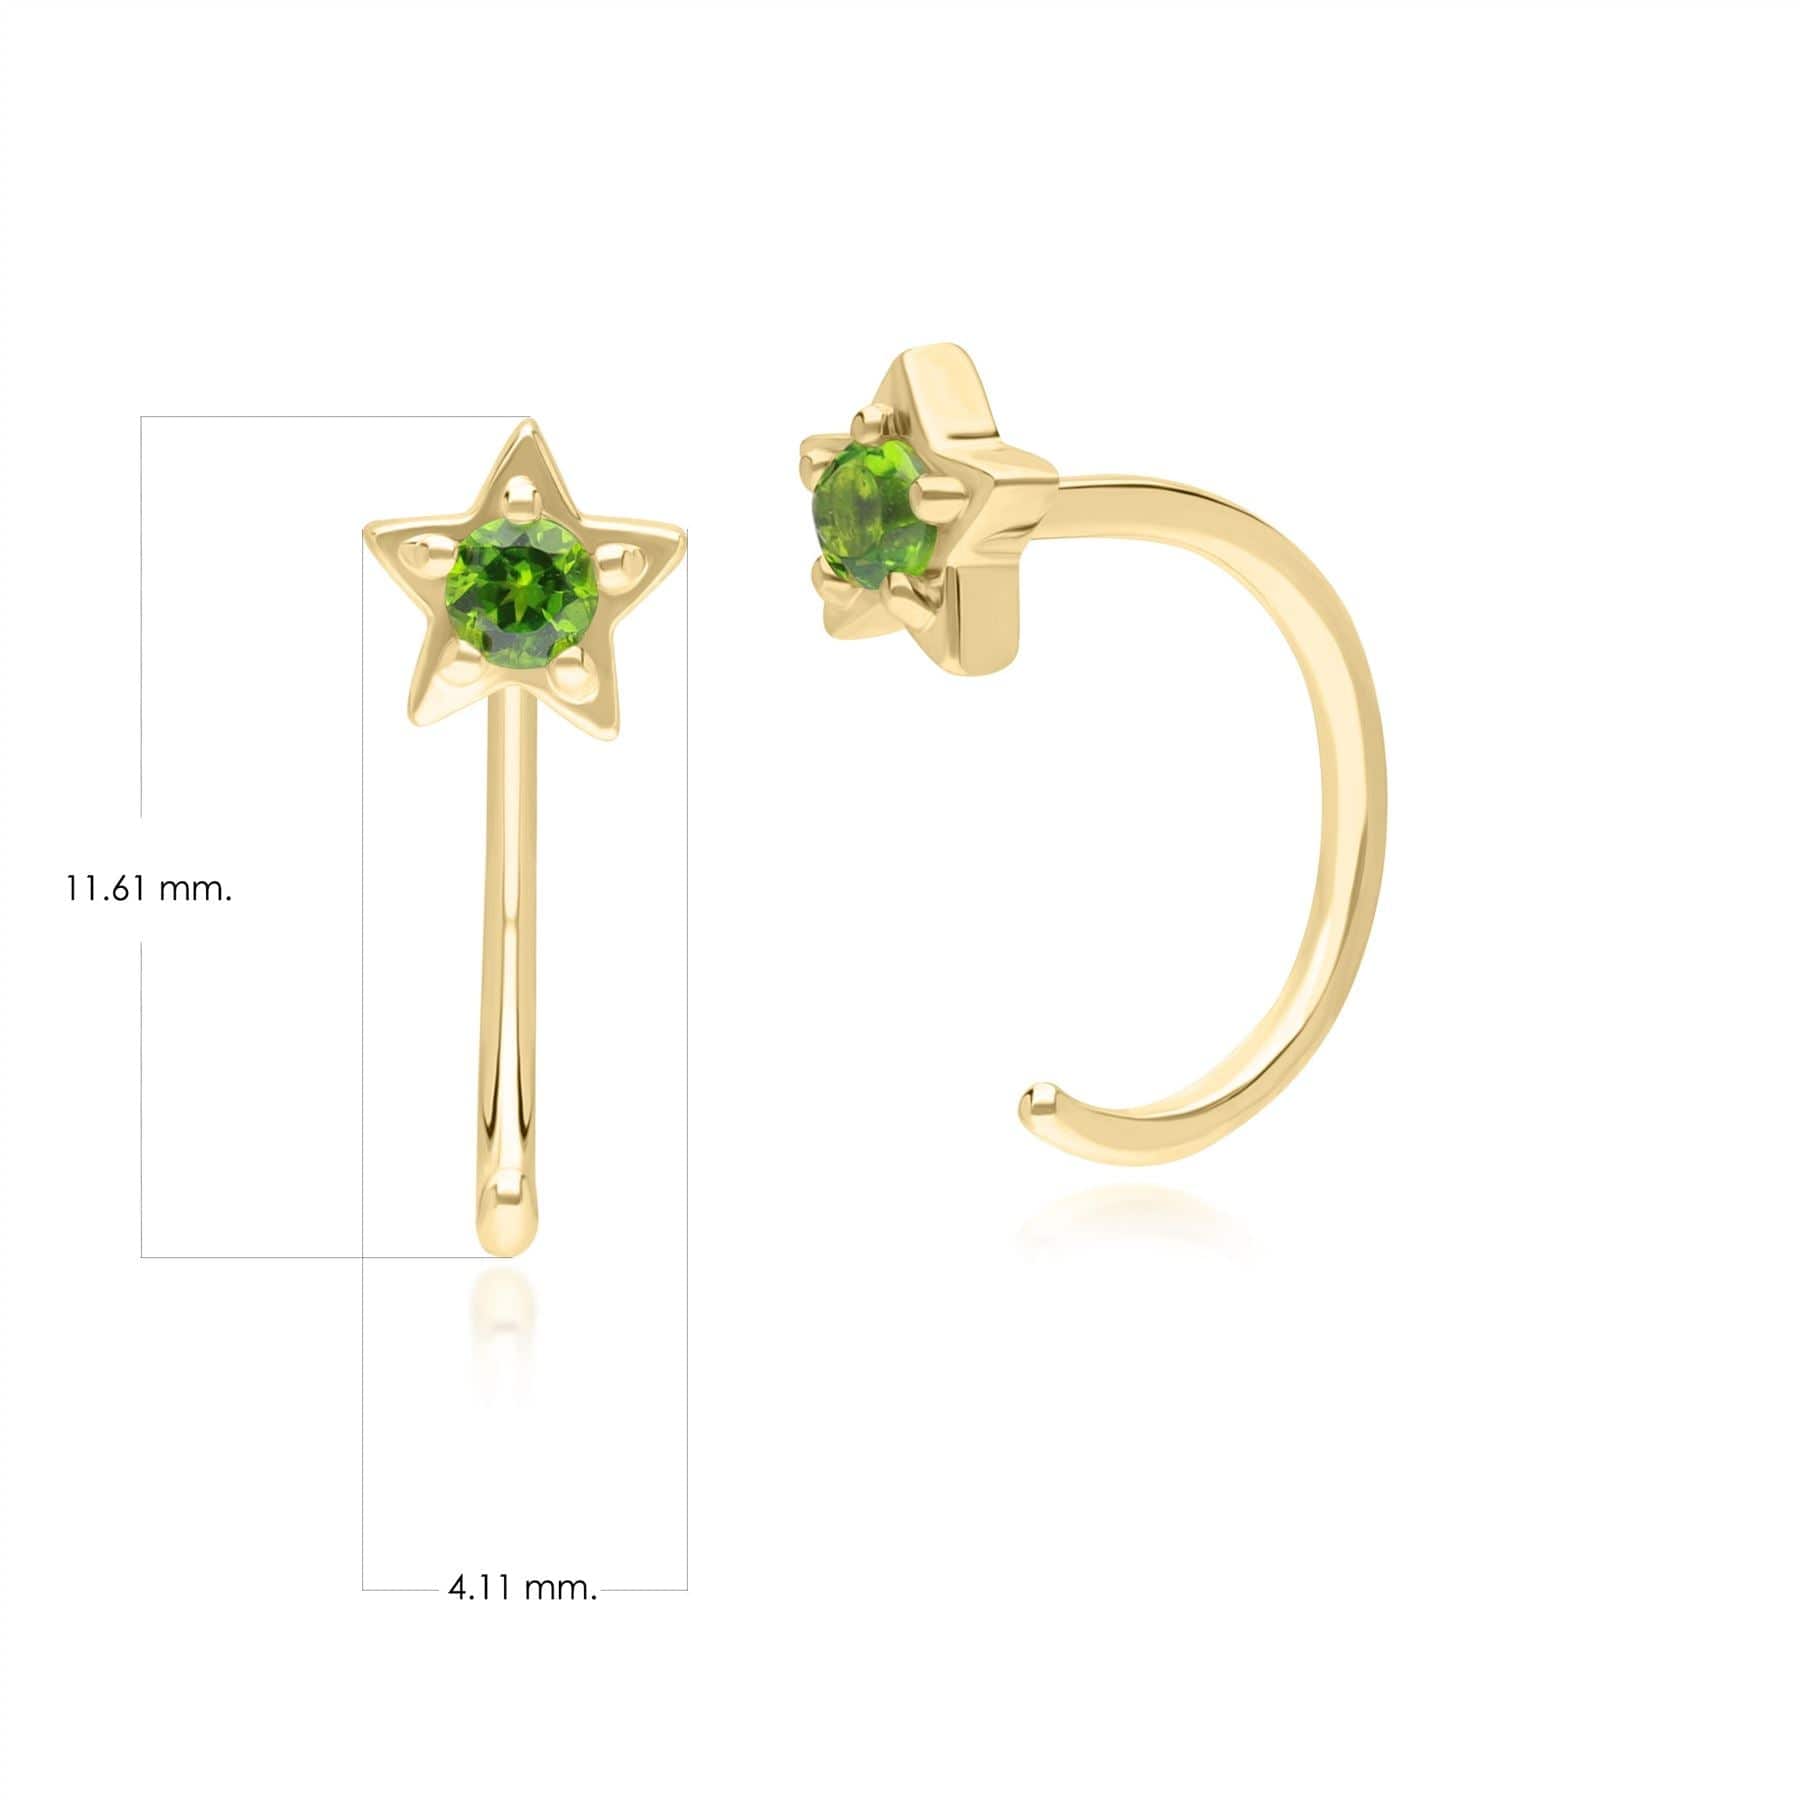 Modern Classic Chrome Diopside Pull Through Hoop Earrings in 9ct Yellow Gold - Gemondo